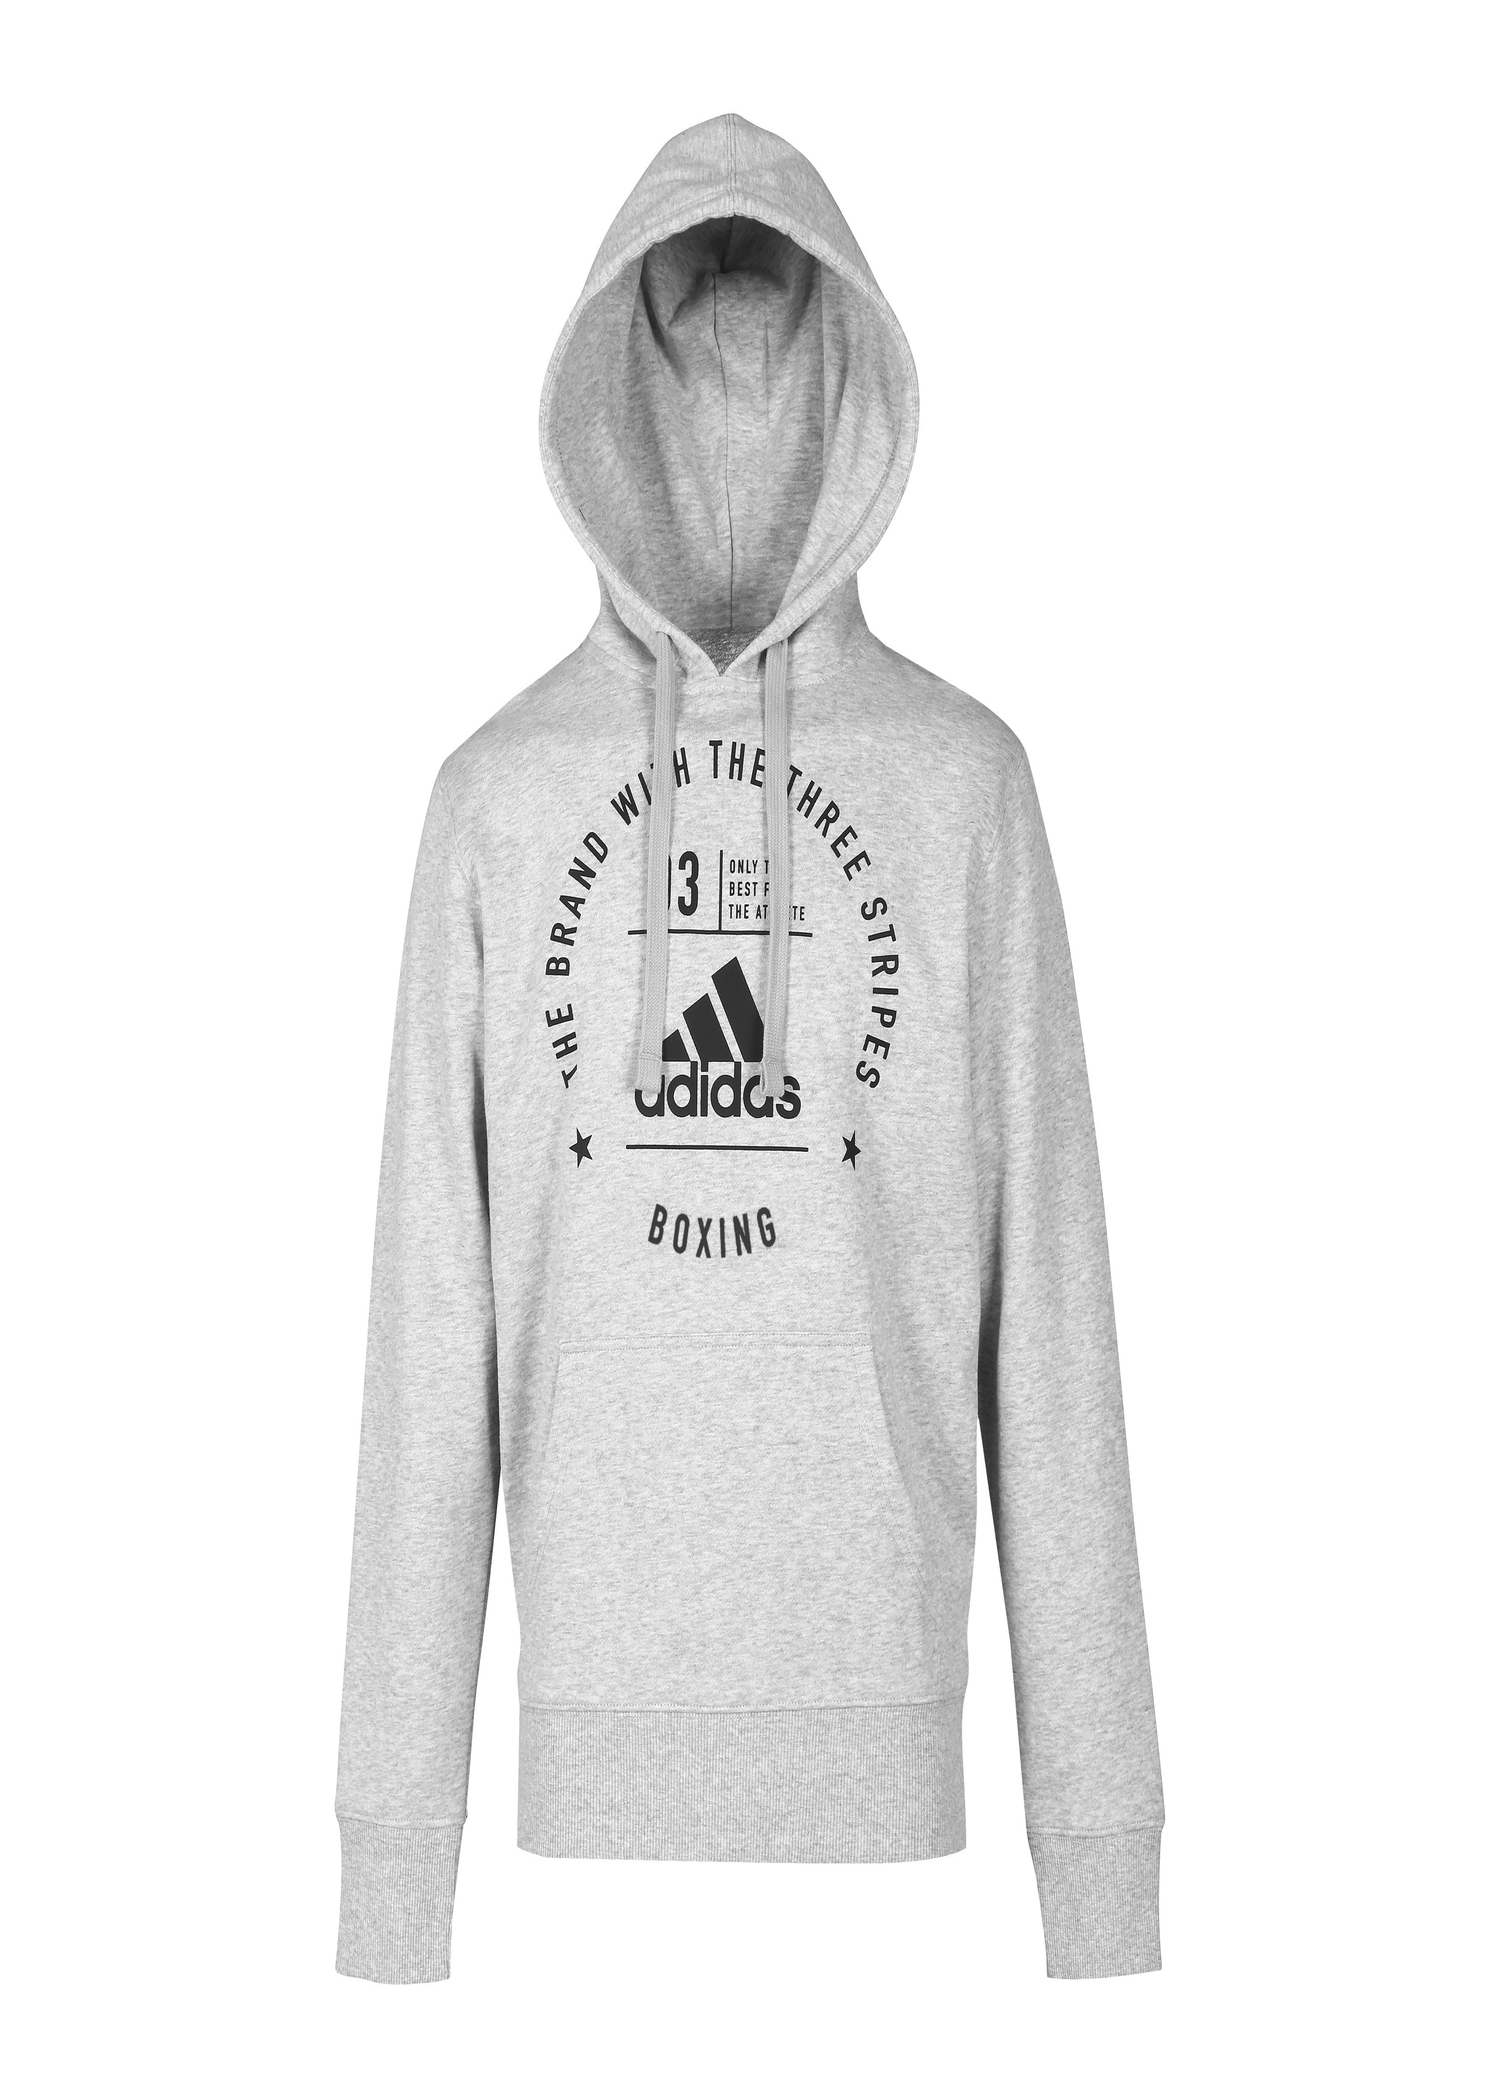 — Adidas Hoodie- Unisex for Community - Woman, Gym, Man, Boxing Work for FightersShop